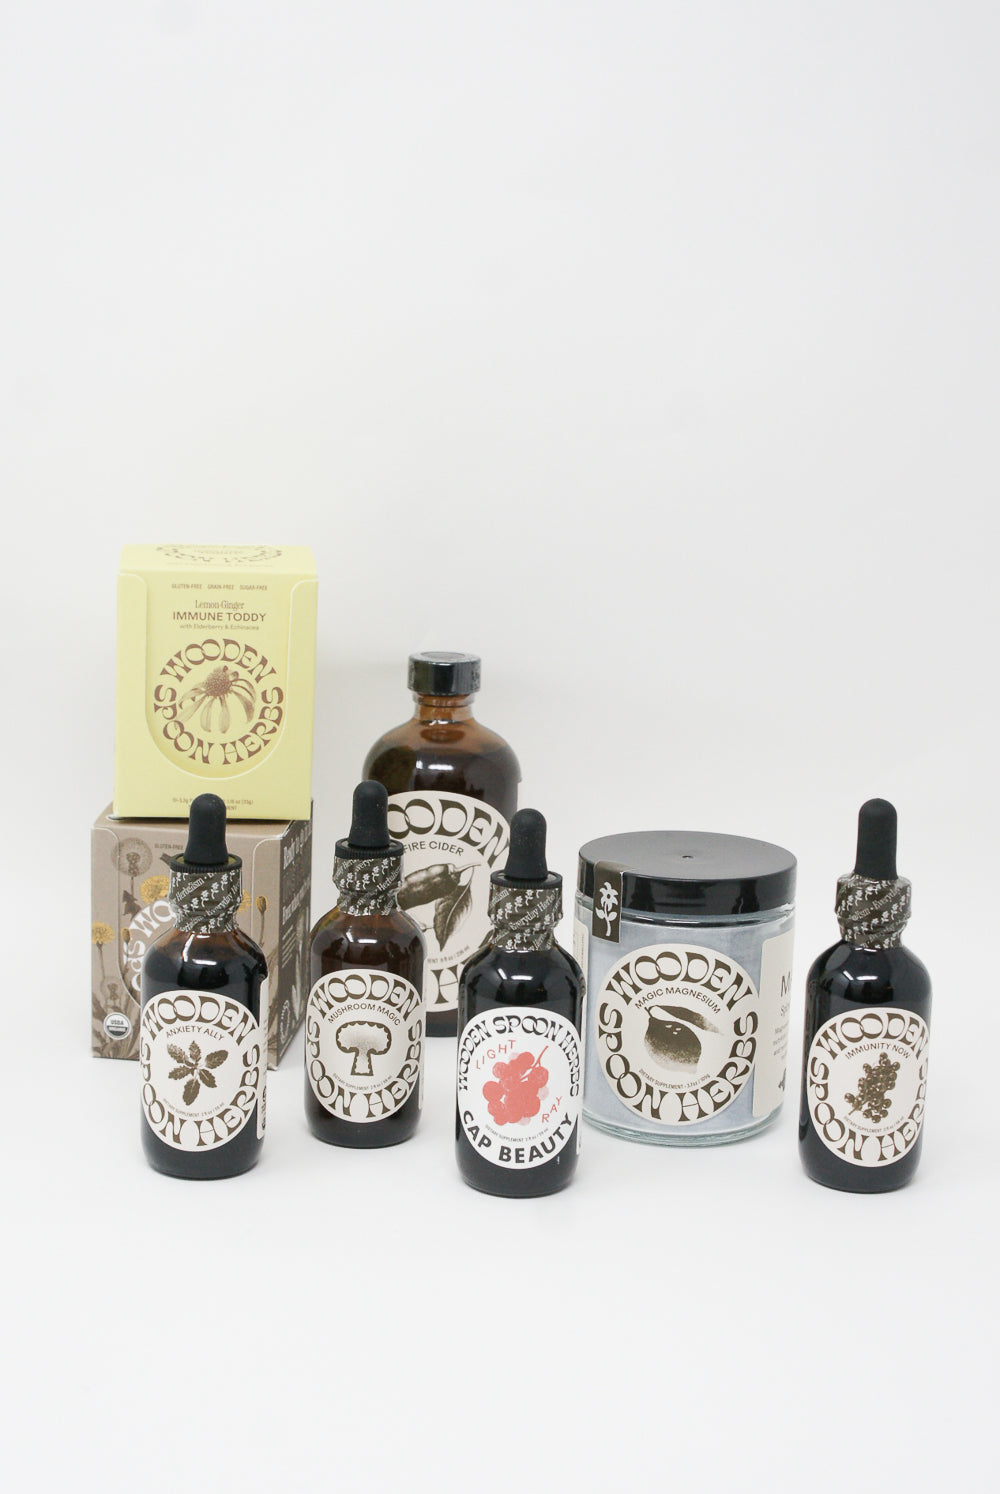 A collection of Anxiety Ally Tincture grooming products with labels, including oils and balms, infused with USDA Organic herbal extract by Wooden Spoon Herbs.